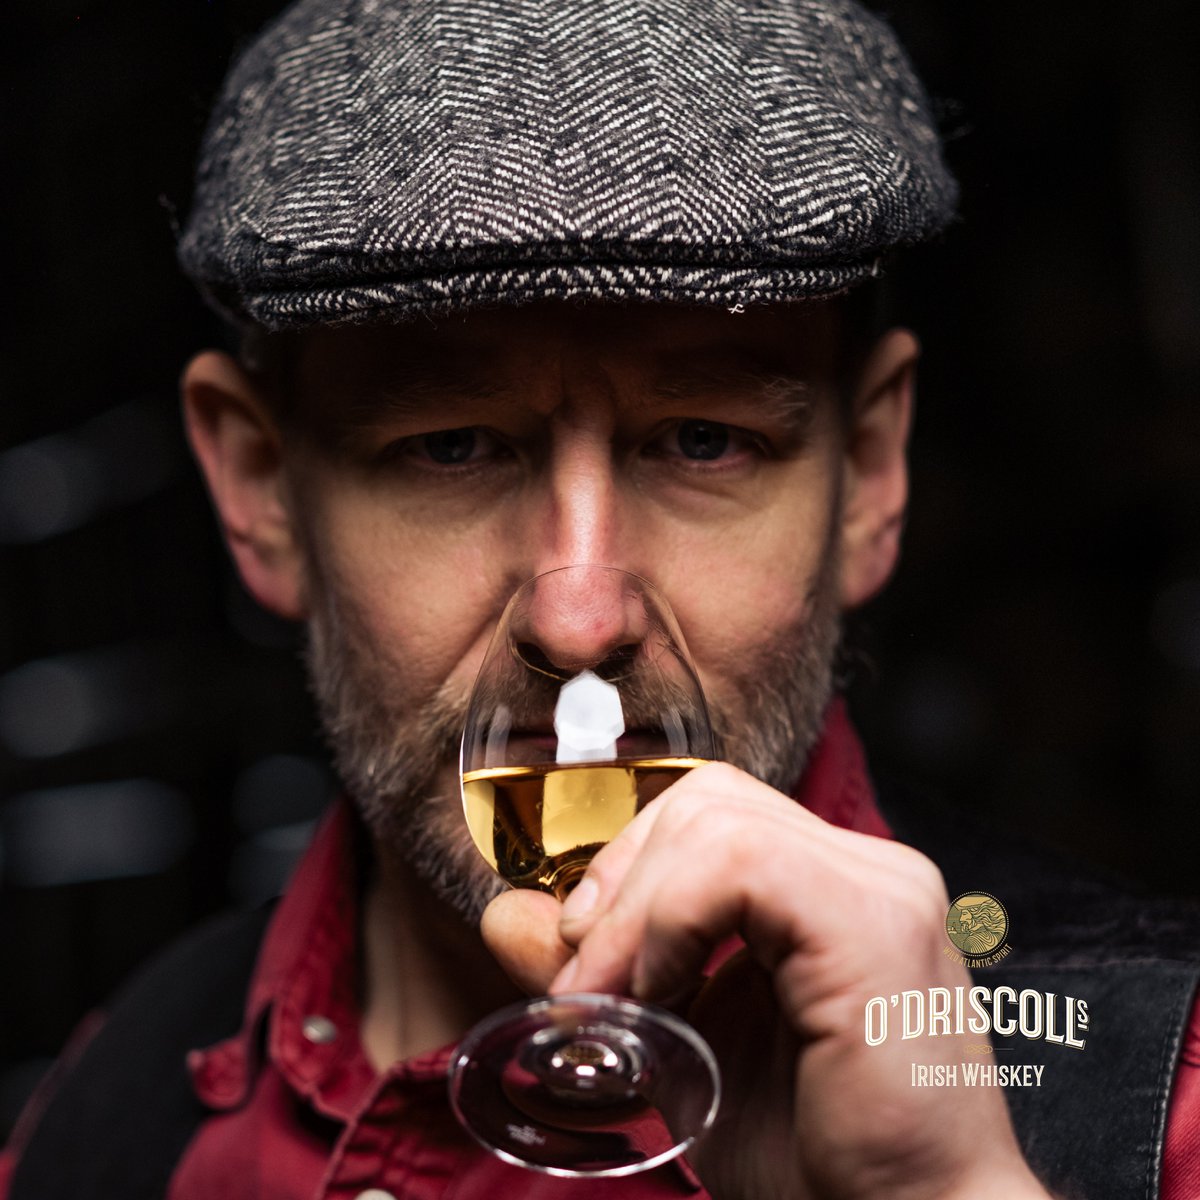 Unlock a world of flavour with O'Driscolls Irish Whiskey, where every sip reveals the distinctive charm and heritage of Ireland.  🇮🇪 🥃🏴‍☠️​ 🖱Visit: odriscollsirishwhiskey.com #odriscollsirishwhiskey #familytradition #irishwhiskey #whiskey #whiskeylover #craftsmanship